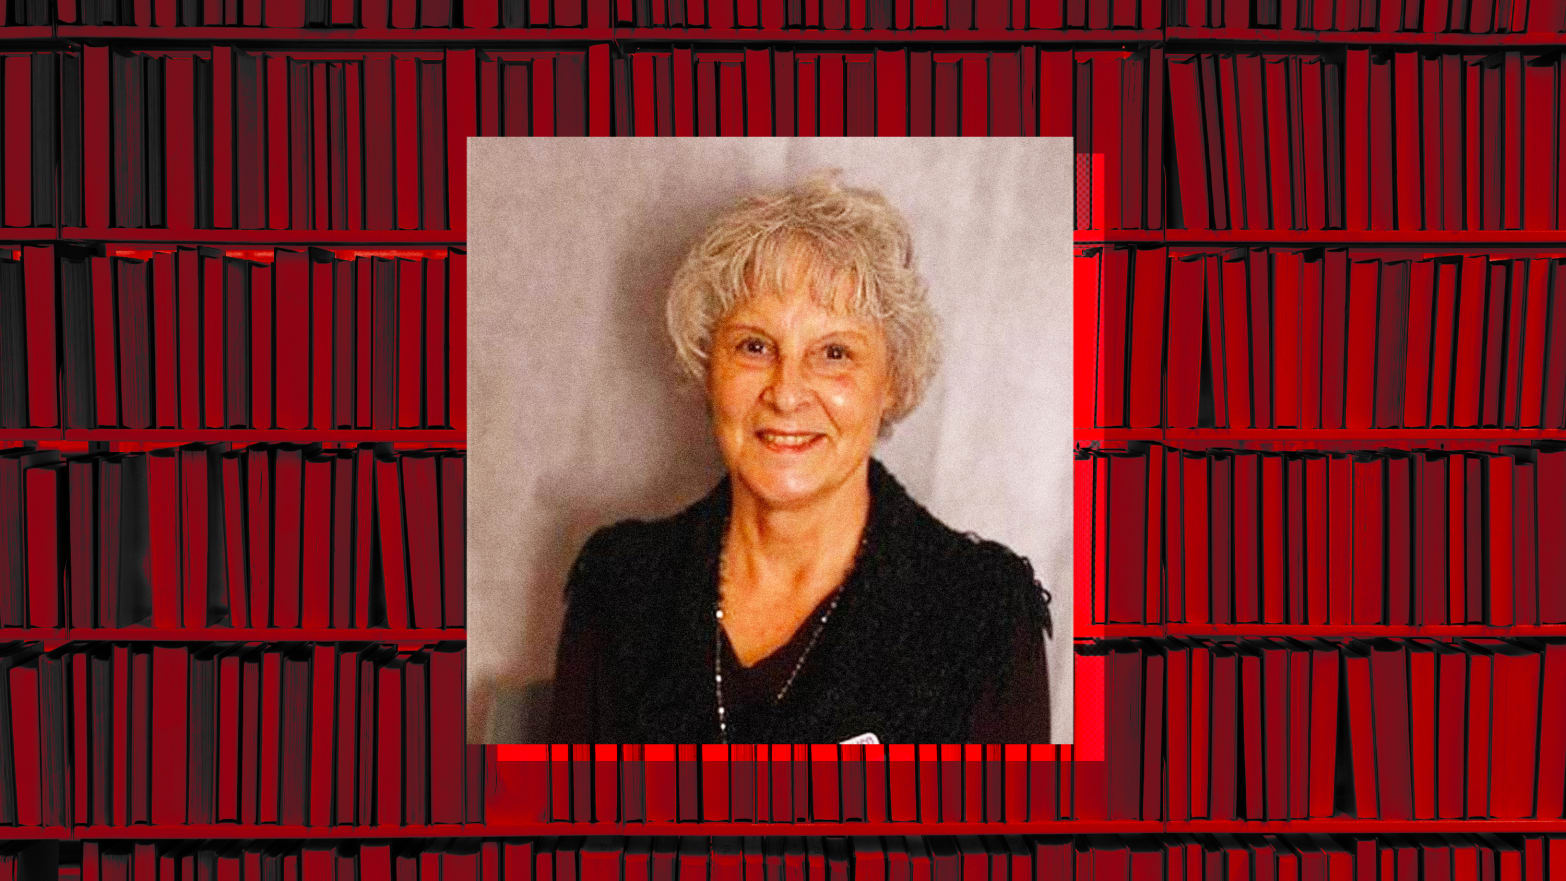 A photo illustration of school board trustee Karen Lowery over a library bookcase red background.